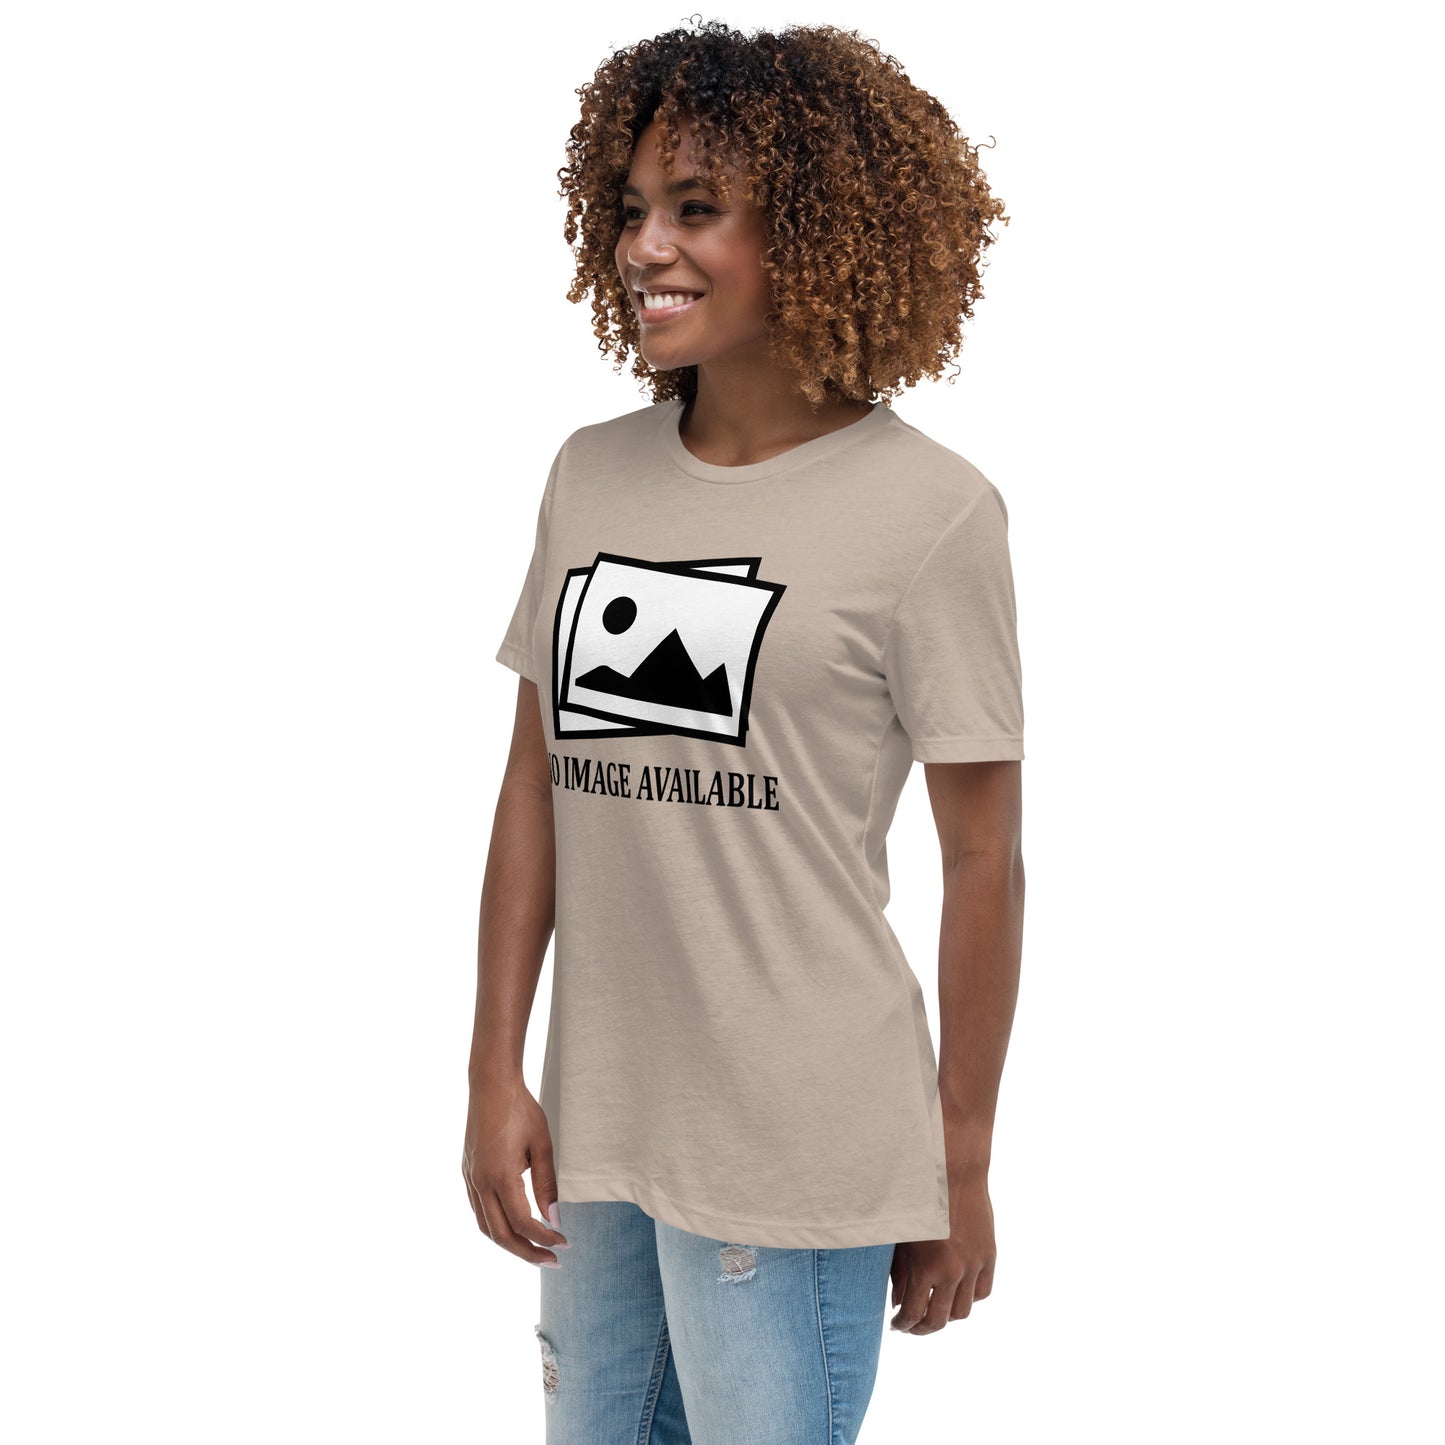 Women with stone t-shirt with image and text "no image available"